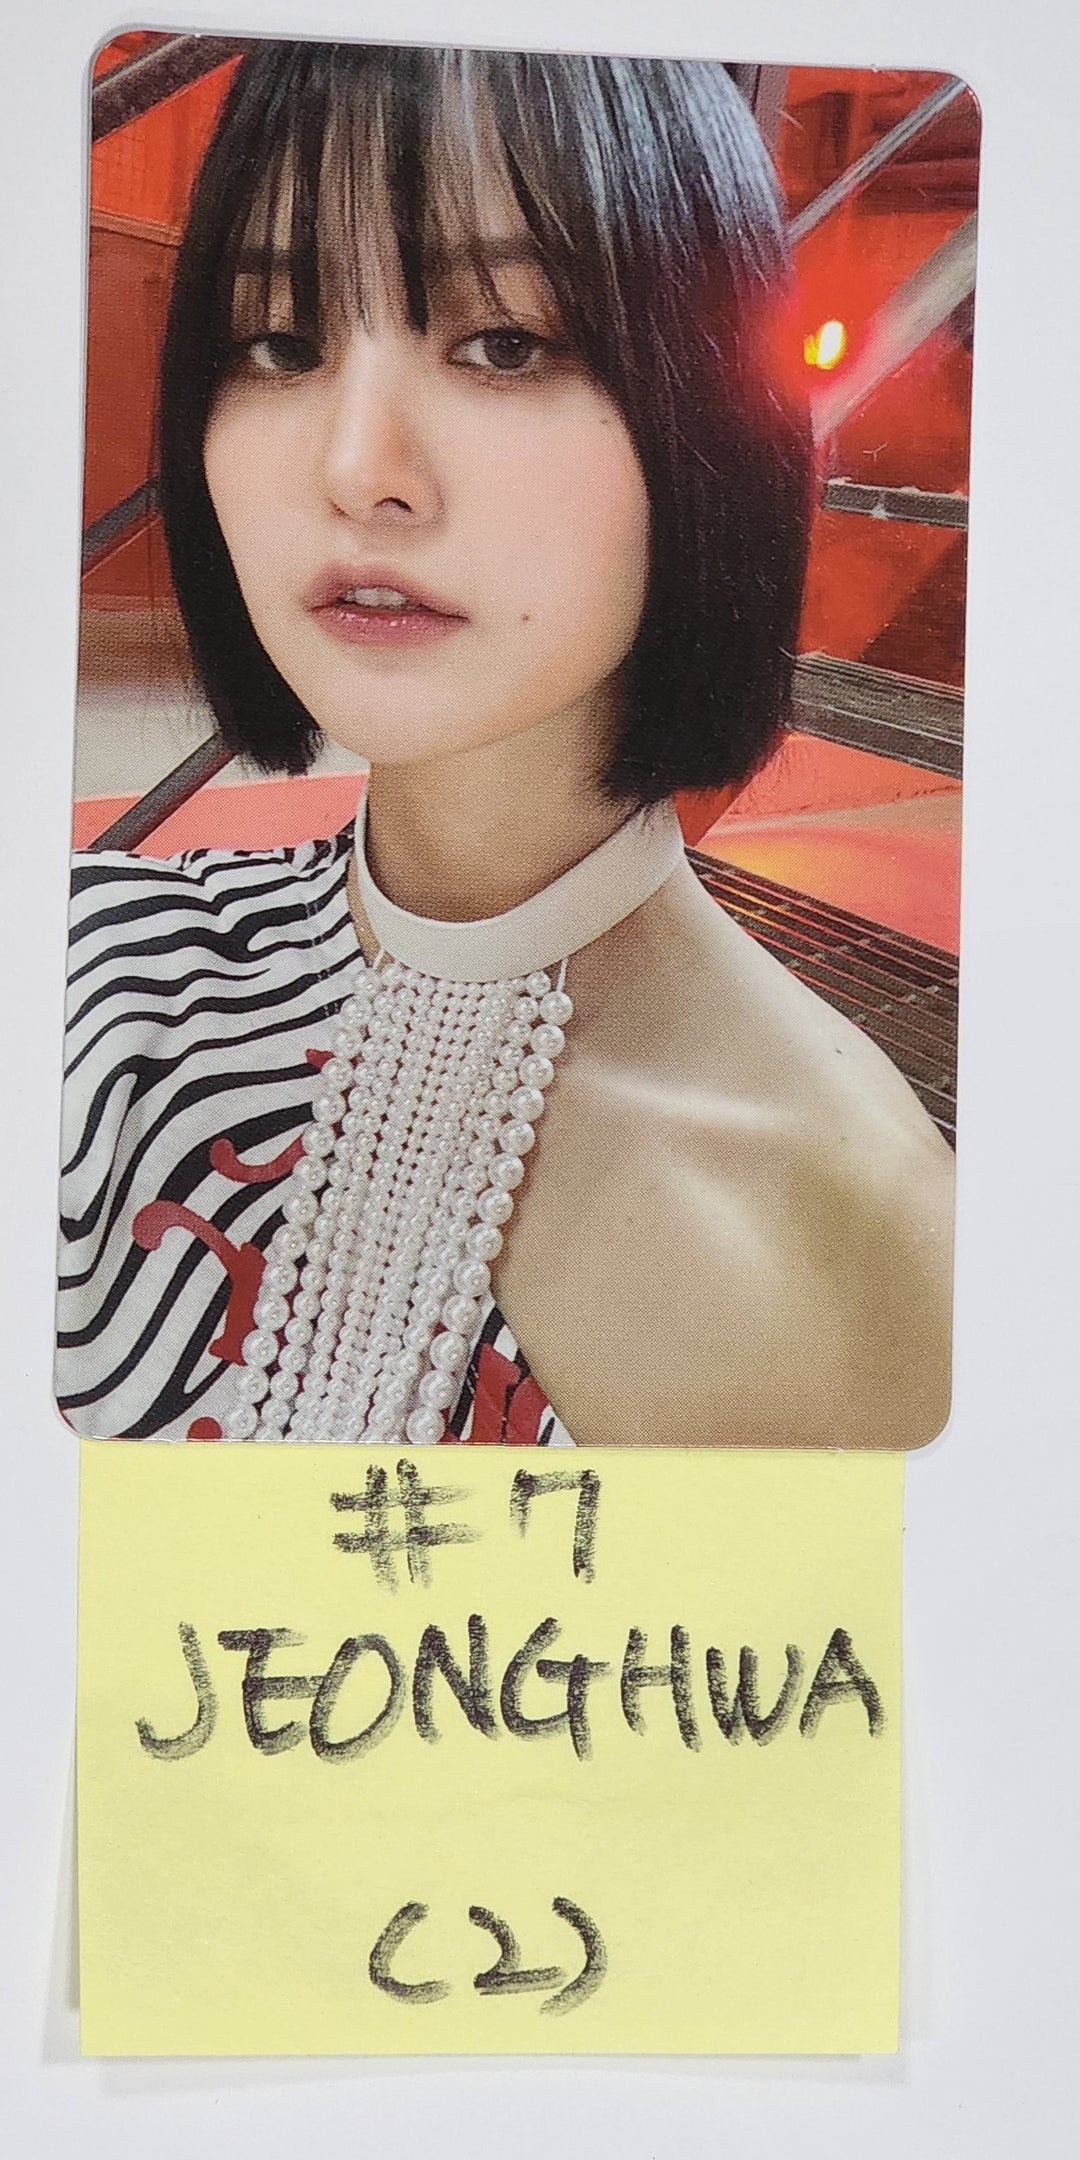 EXID "X" - Official Photocard, Special Card